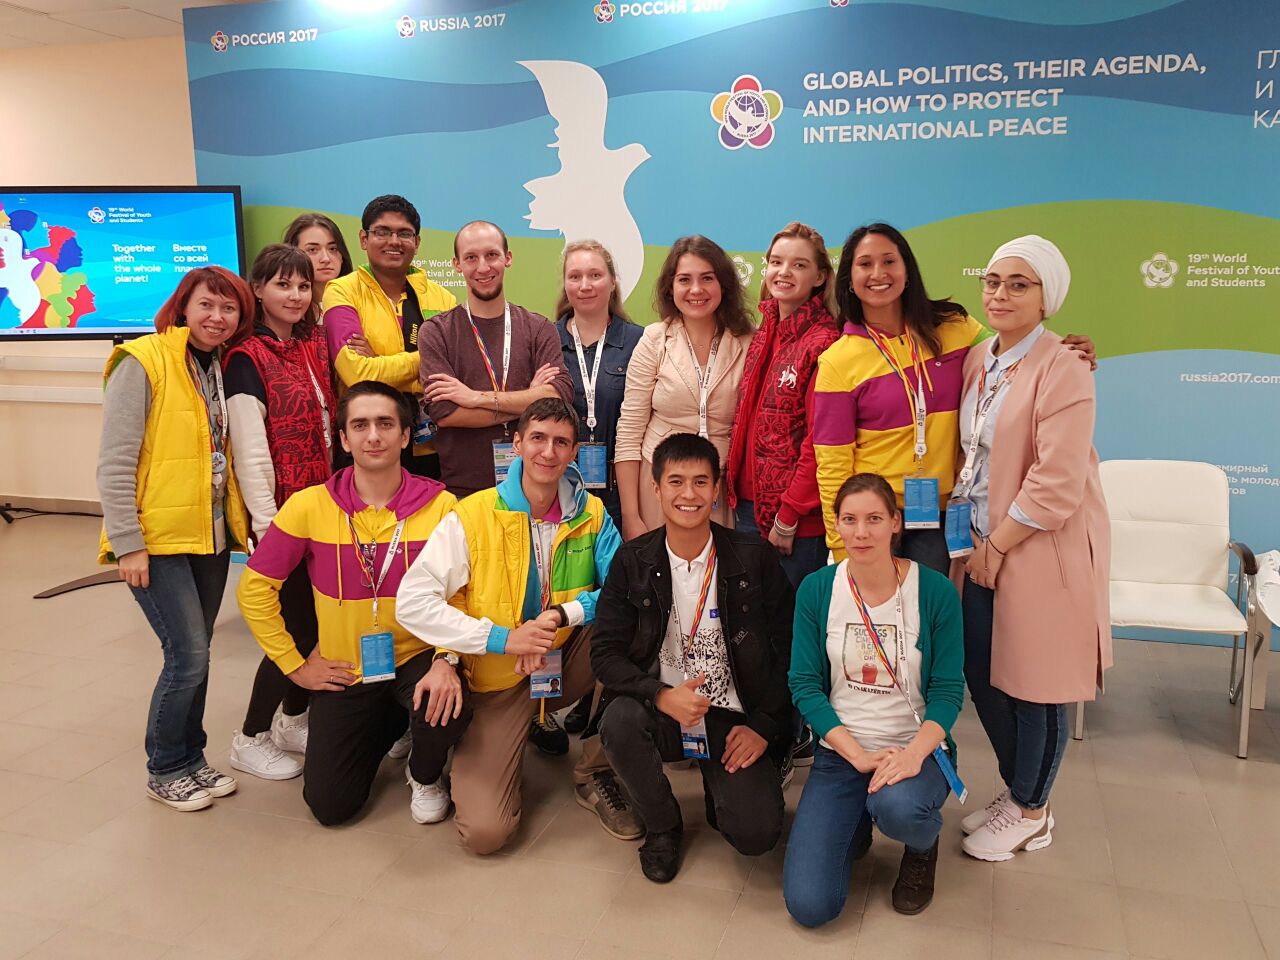 Online Education Enhancement Project Presented by KFU Master's Student to President Vladimir Putin ,World Festival of Youth and Students, IPIC, President of Russia